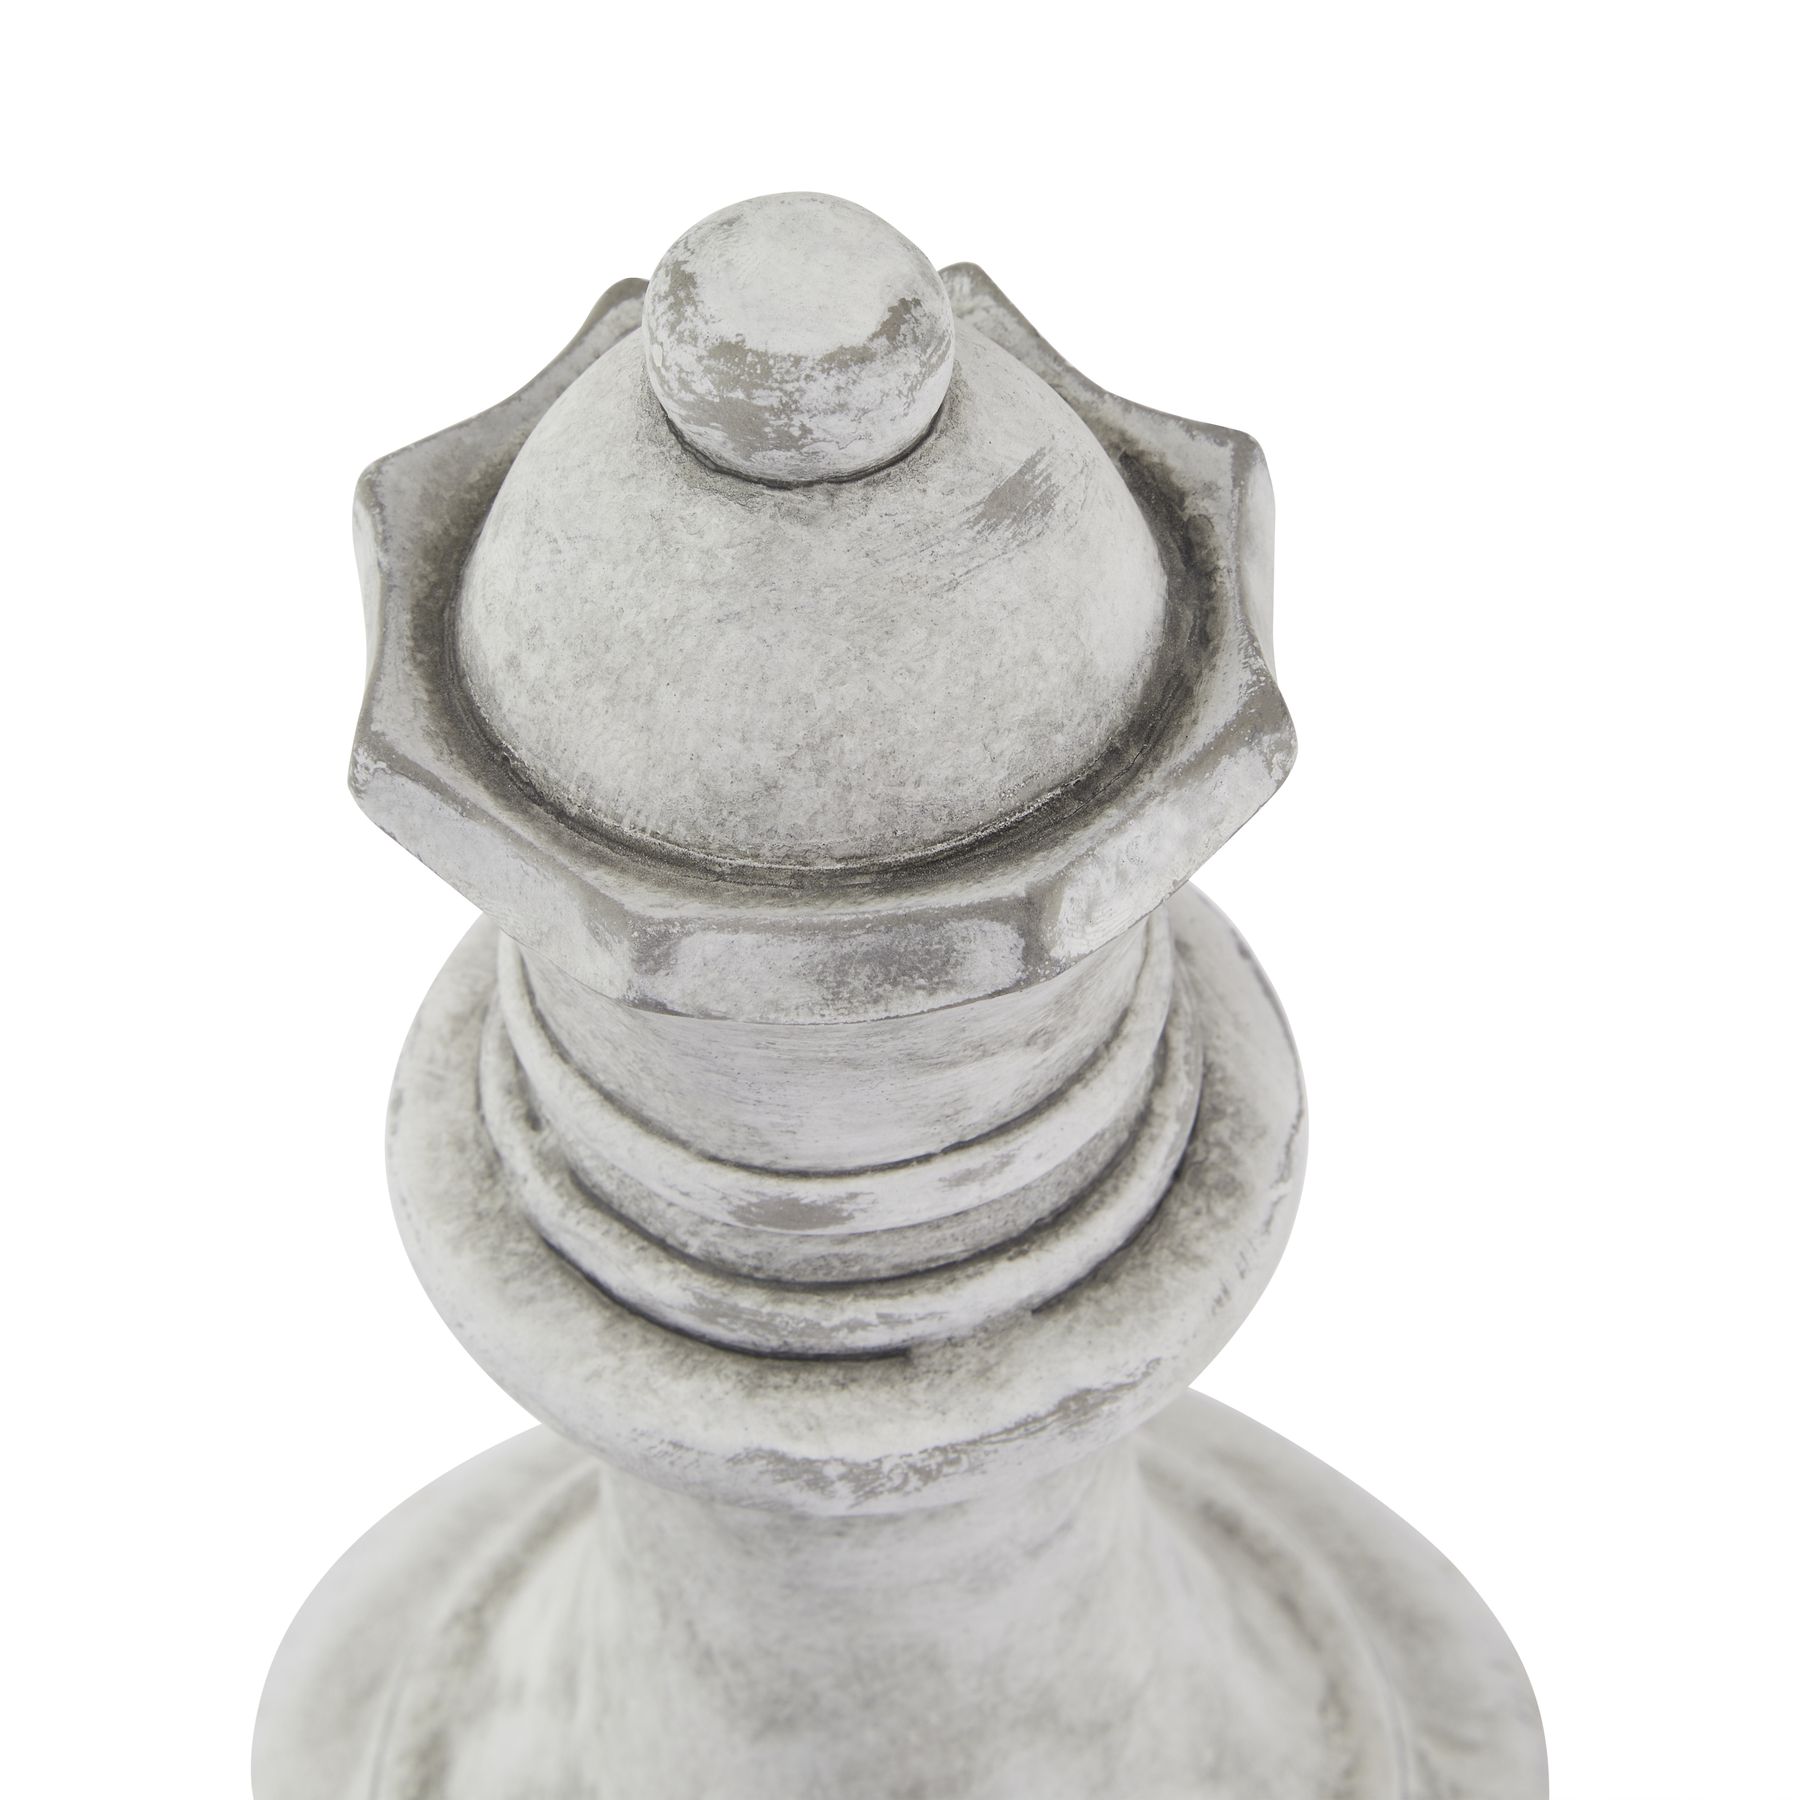 Athena Stone Queen Chess Piece - Image 2